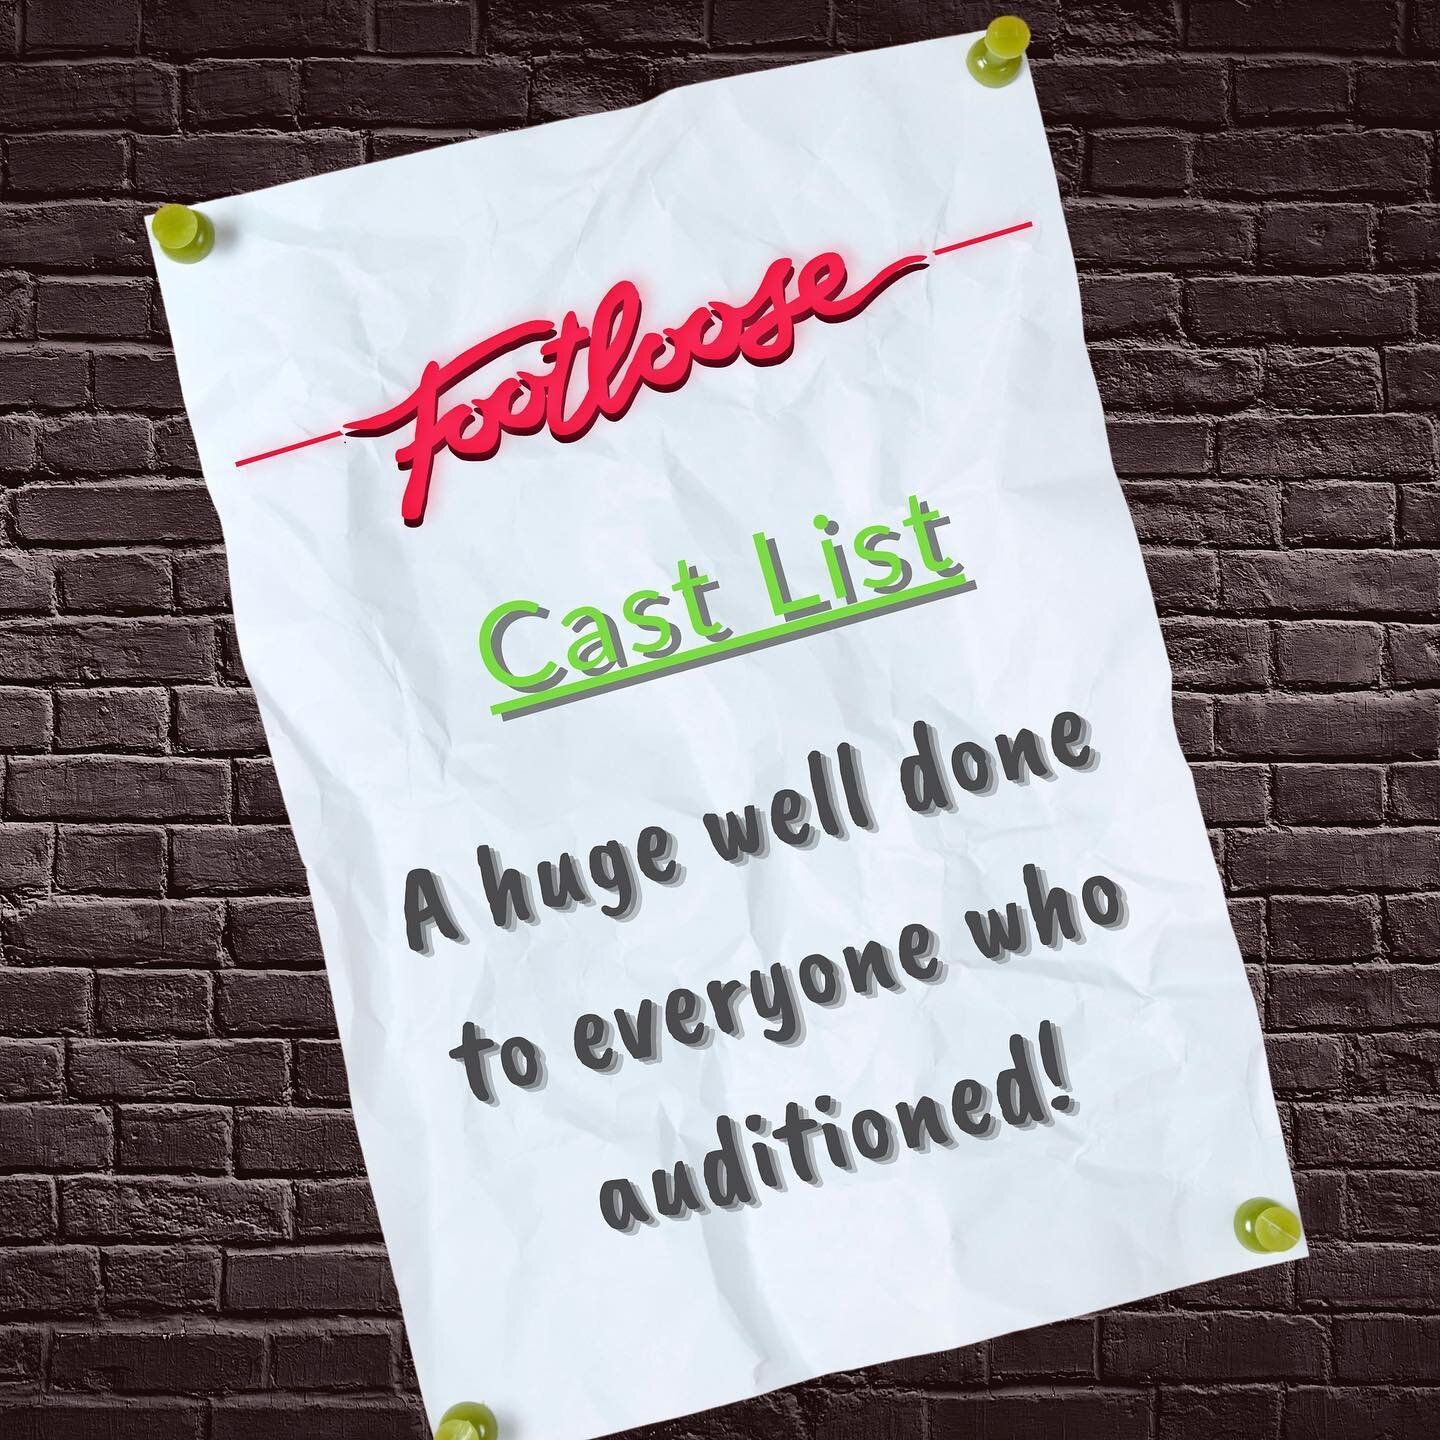 ✨The cast list for Footloose is now LIVE! ✨A HUGE well done to everyone who auditioned! You were all incredible. We can&rsquo;t wait for this summer project team! 💚 https://www.theartscentretelford.com/updates/2021/6/13/footloose-cast-list-2021.